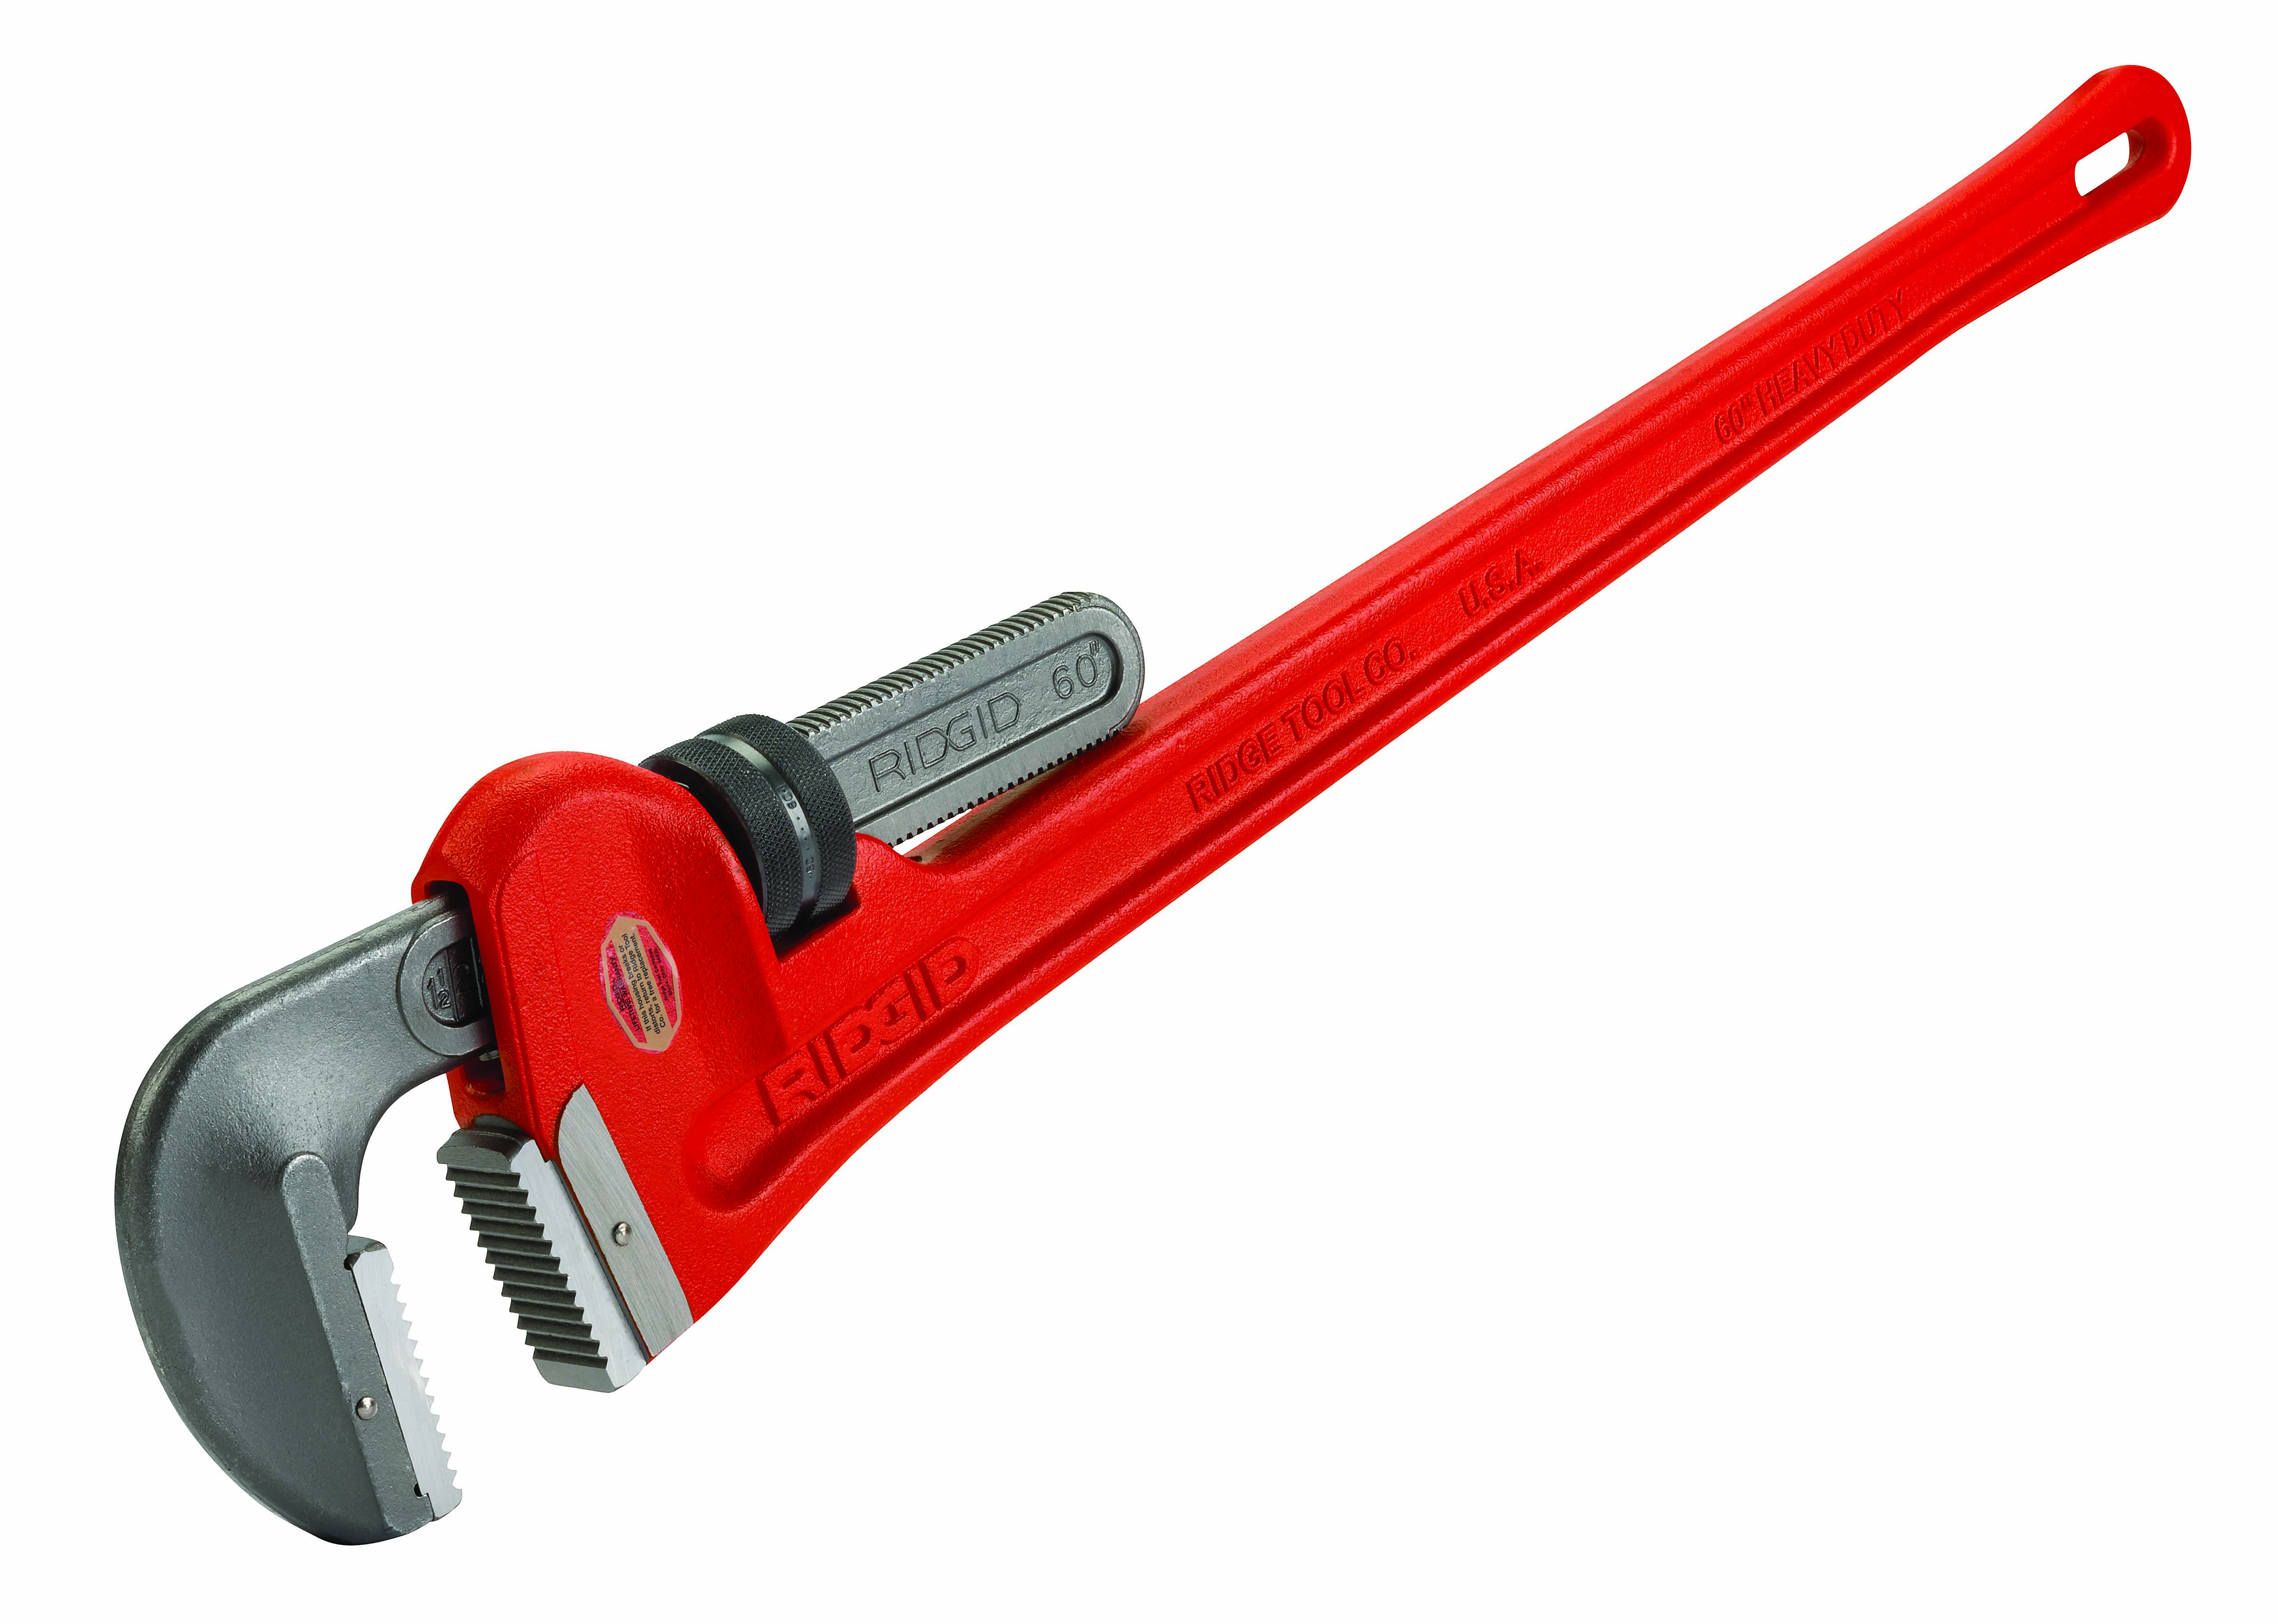 RIDGID 31405 4-1/2" Internal Pipe Wrench for sale online 